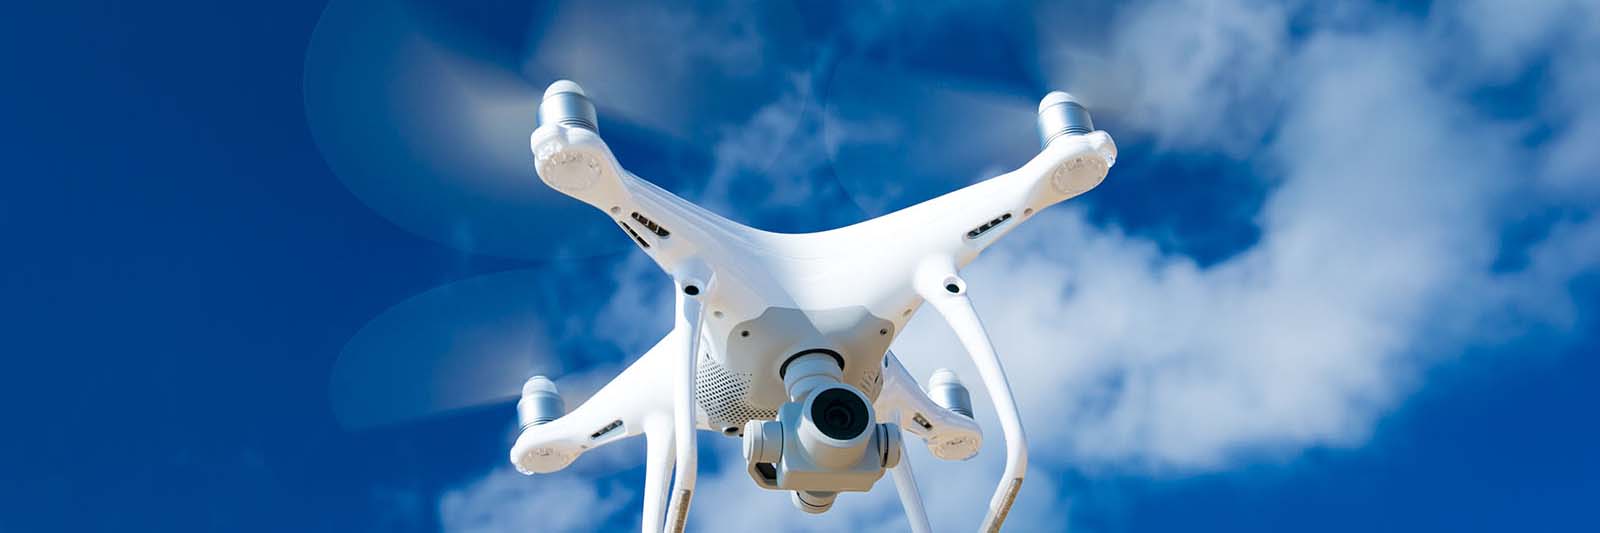 white-drone-hovering-in-a-bright-blue-sky_web_1600x533